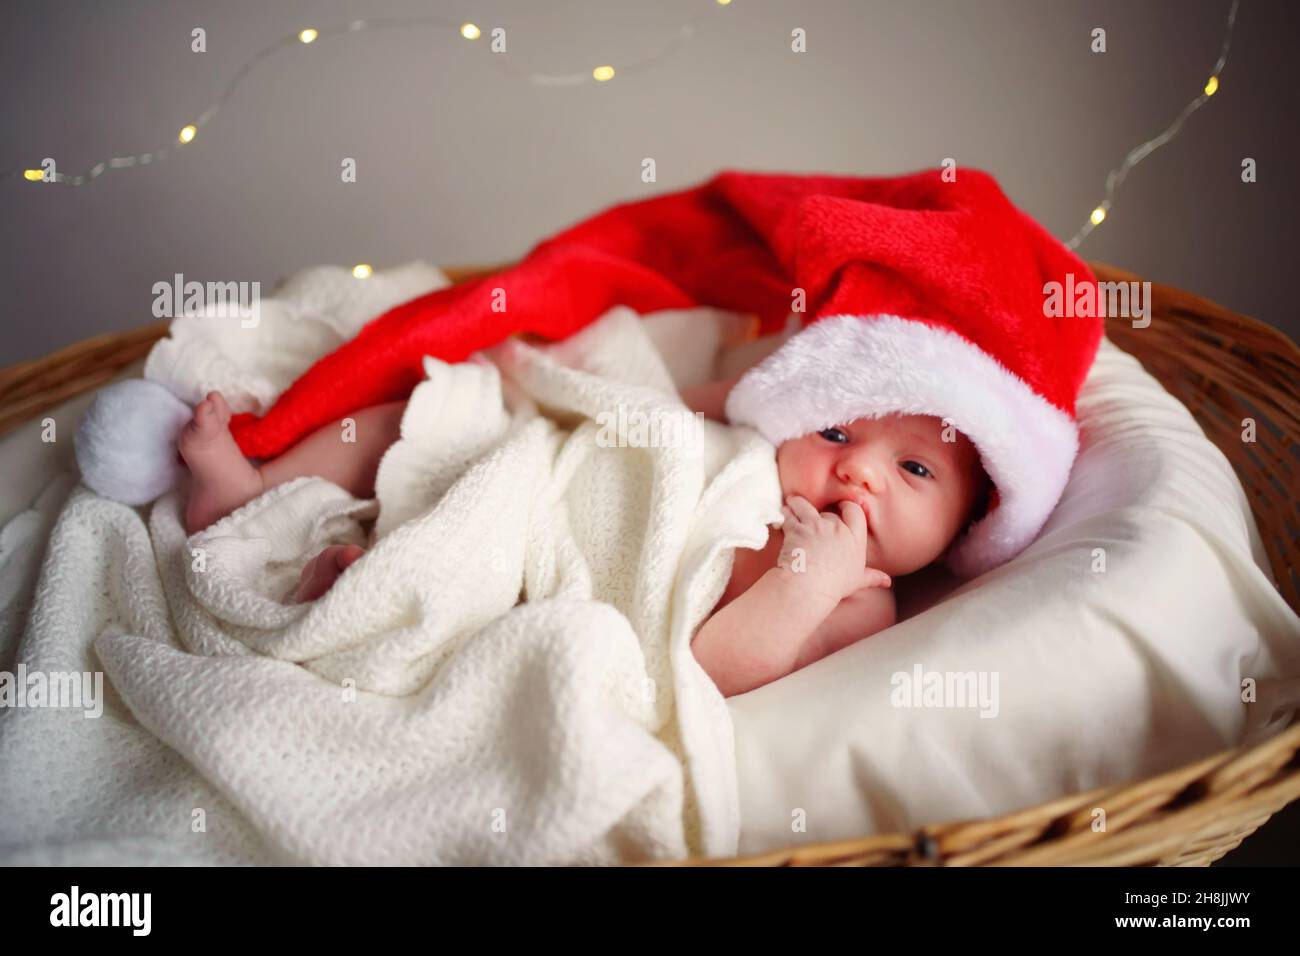 Caucasian newborn baby in Santa's Christmas cap lies in a basket under a white blanket, lights burning against the background. Stock Photo